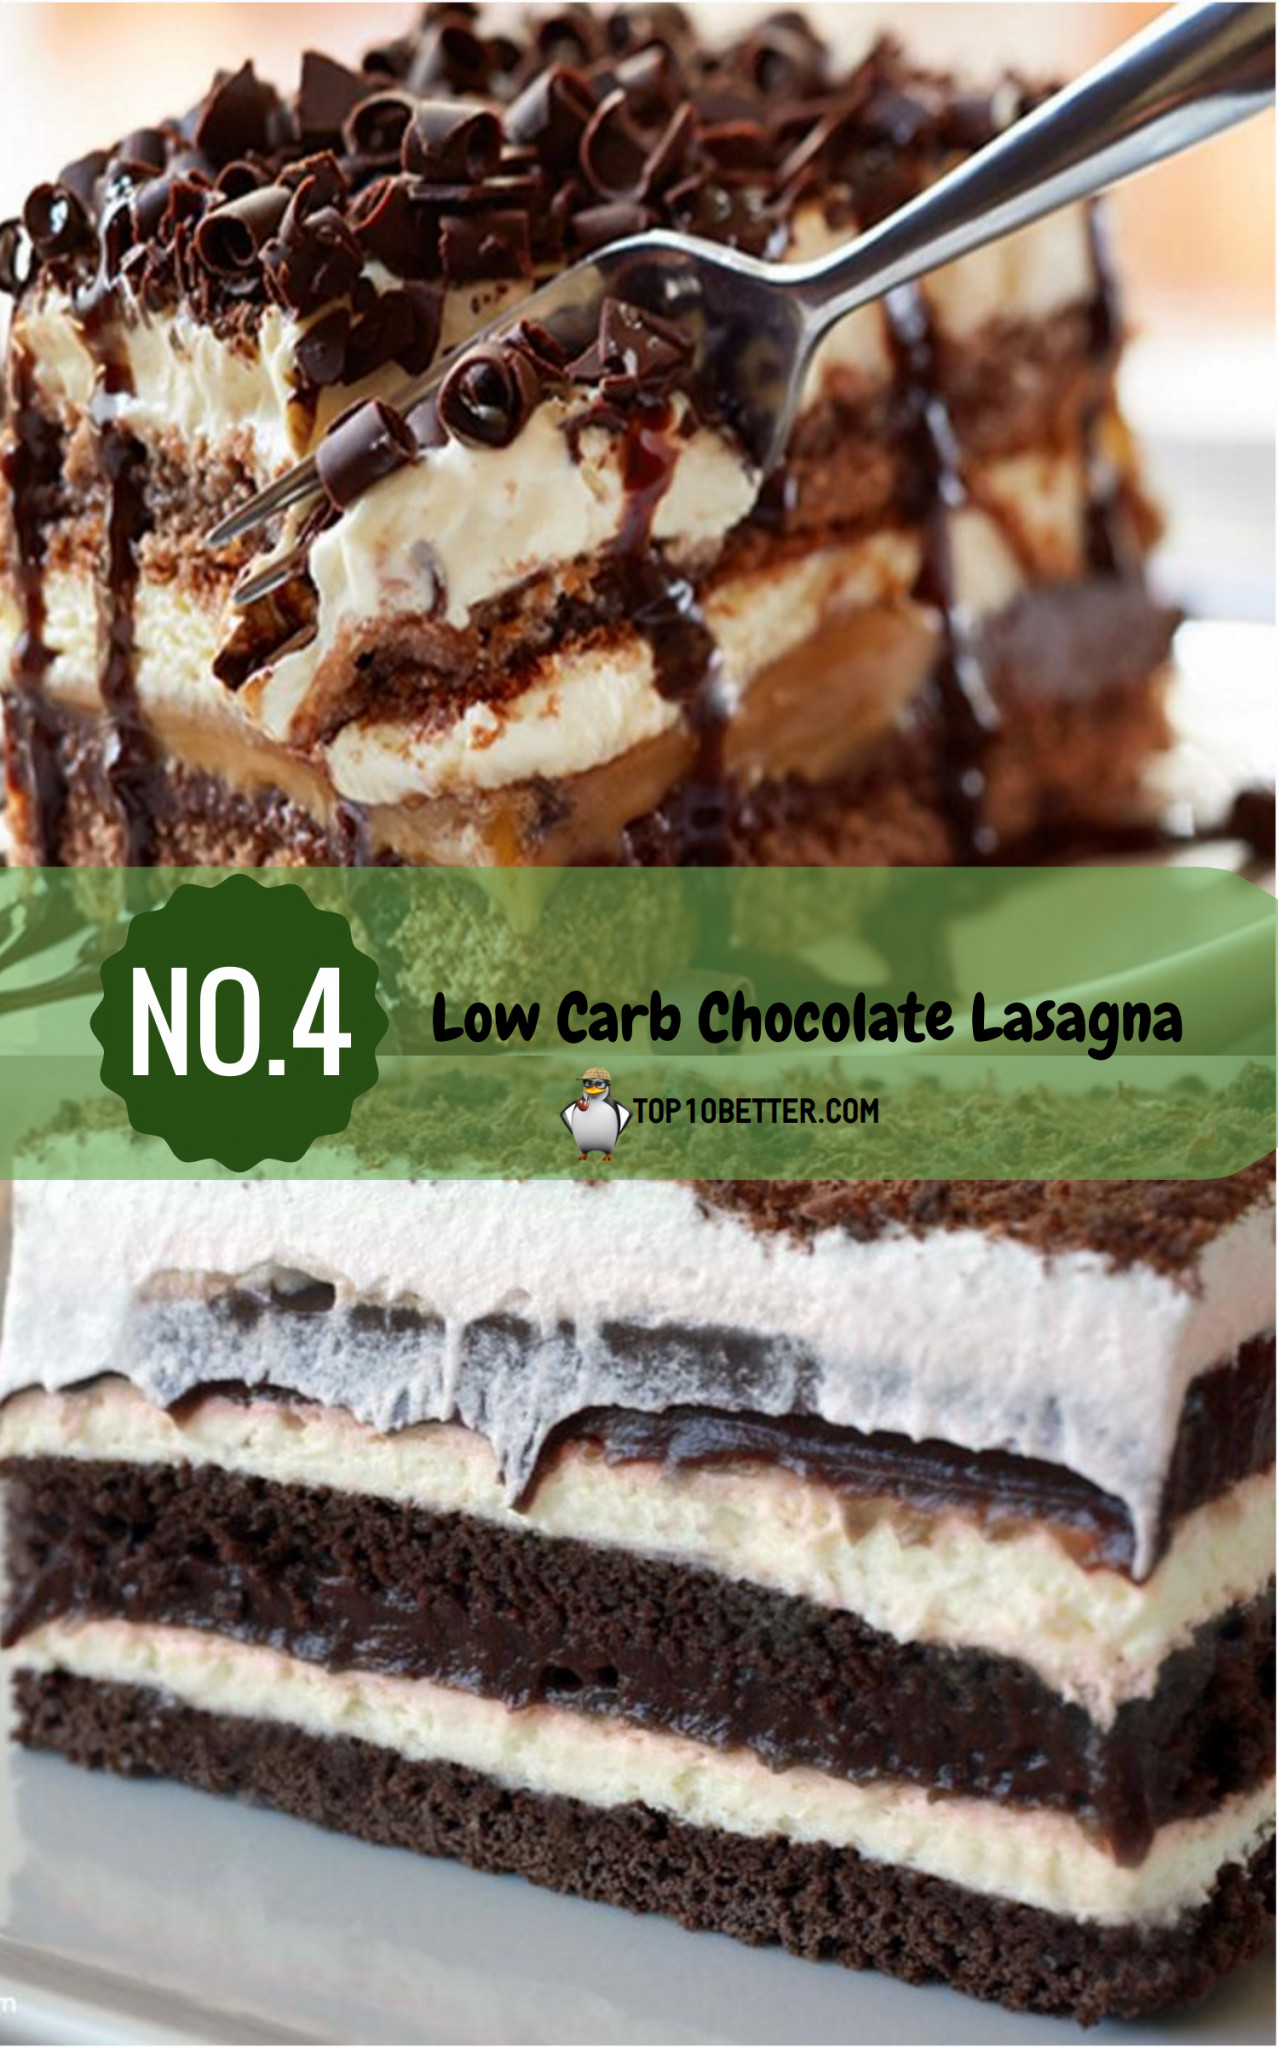 Low Carb Desserts To Buy
 Low Carb Chocolate Lasagna No Bake The top 10 for Woman